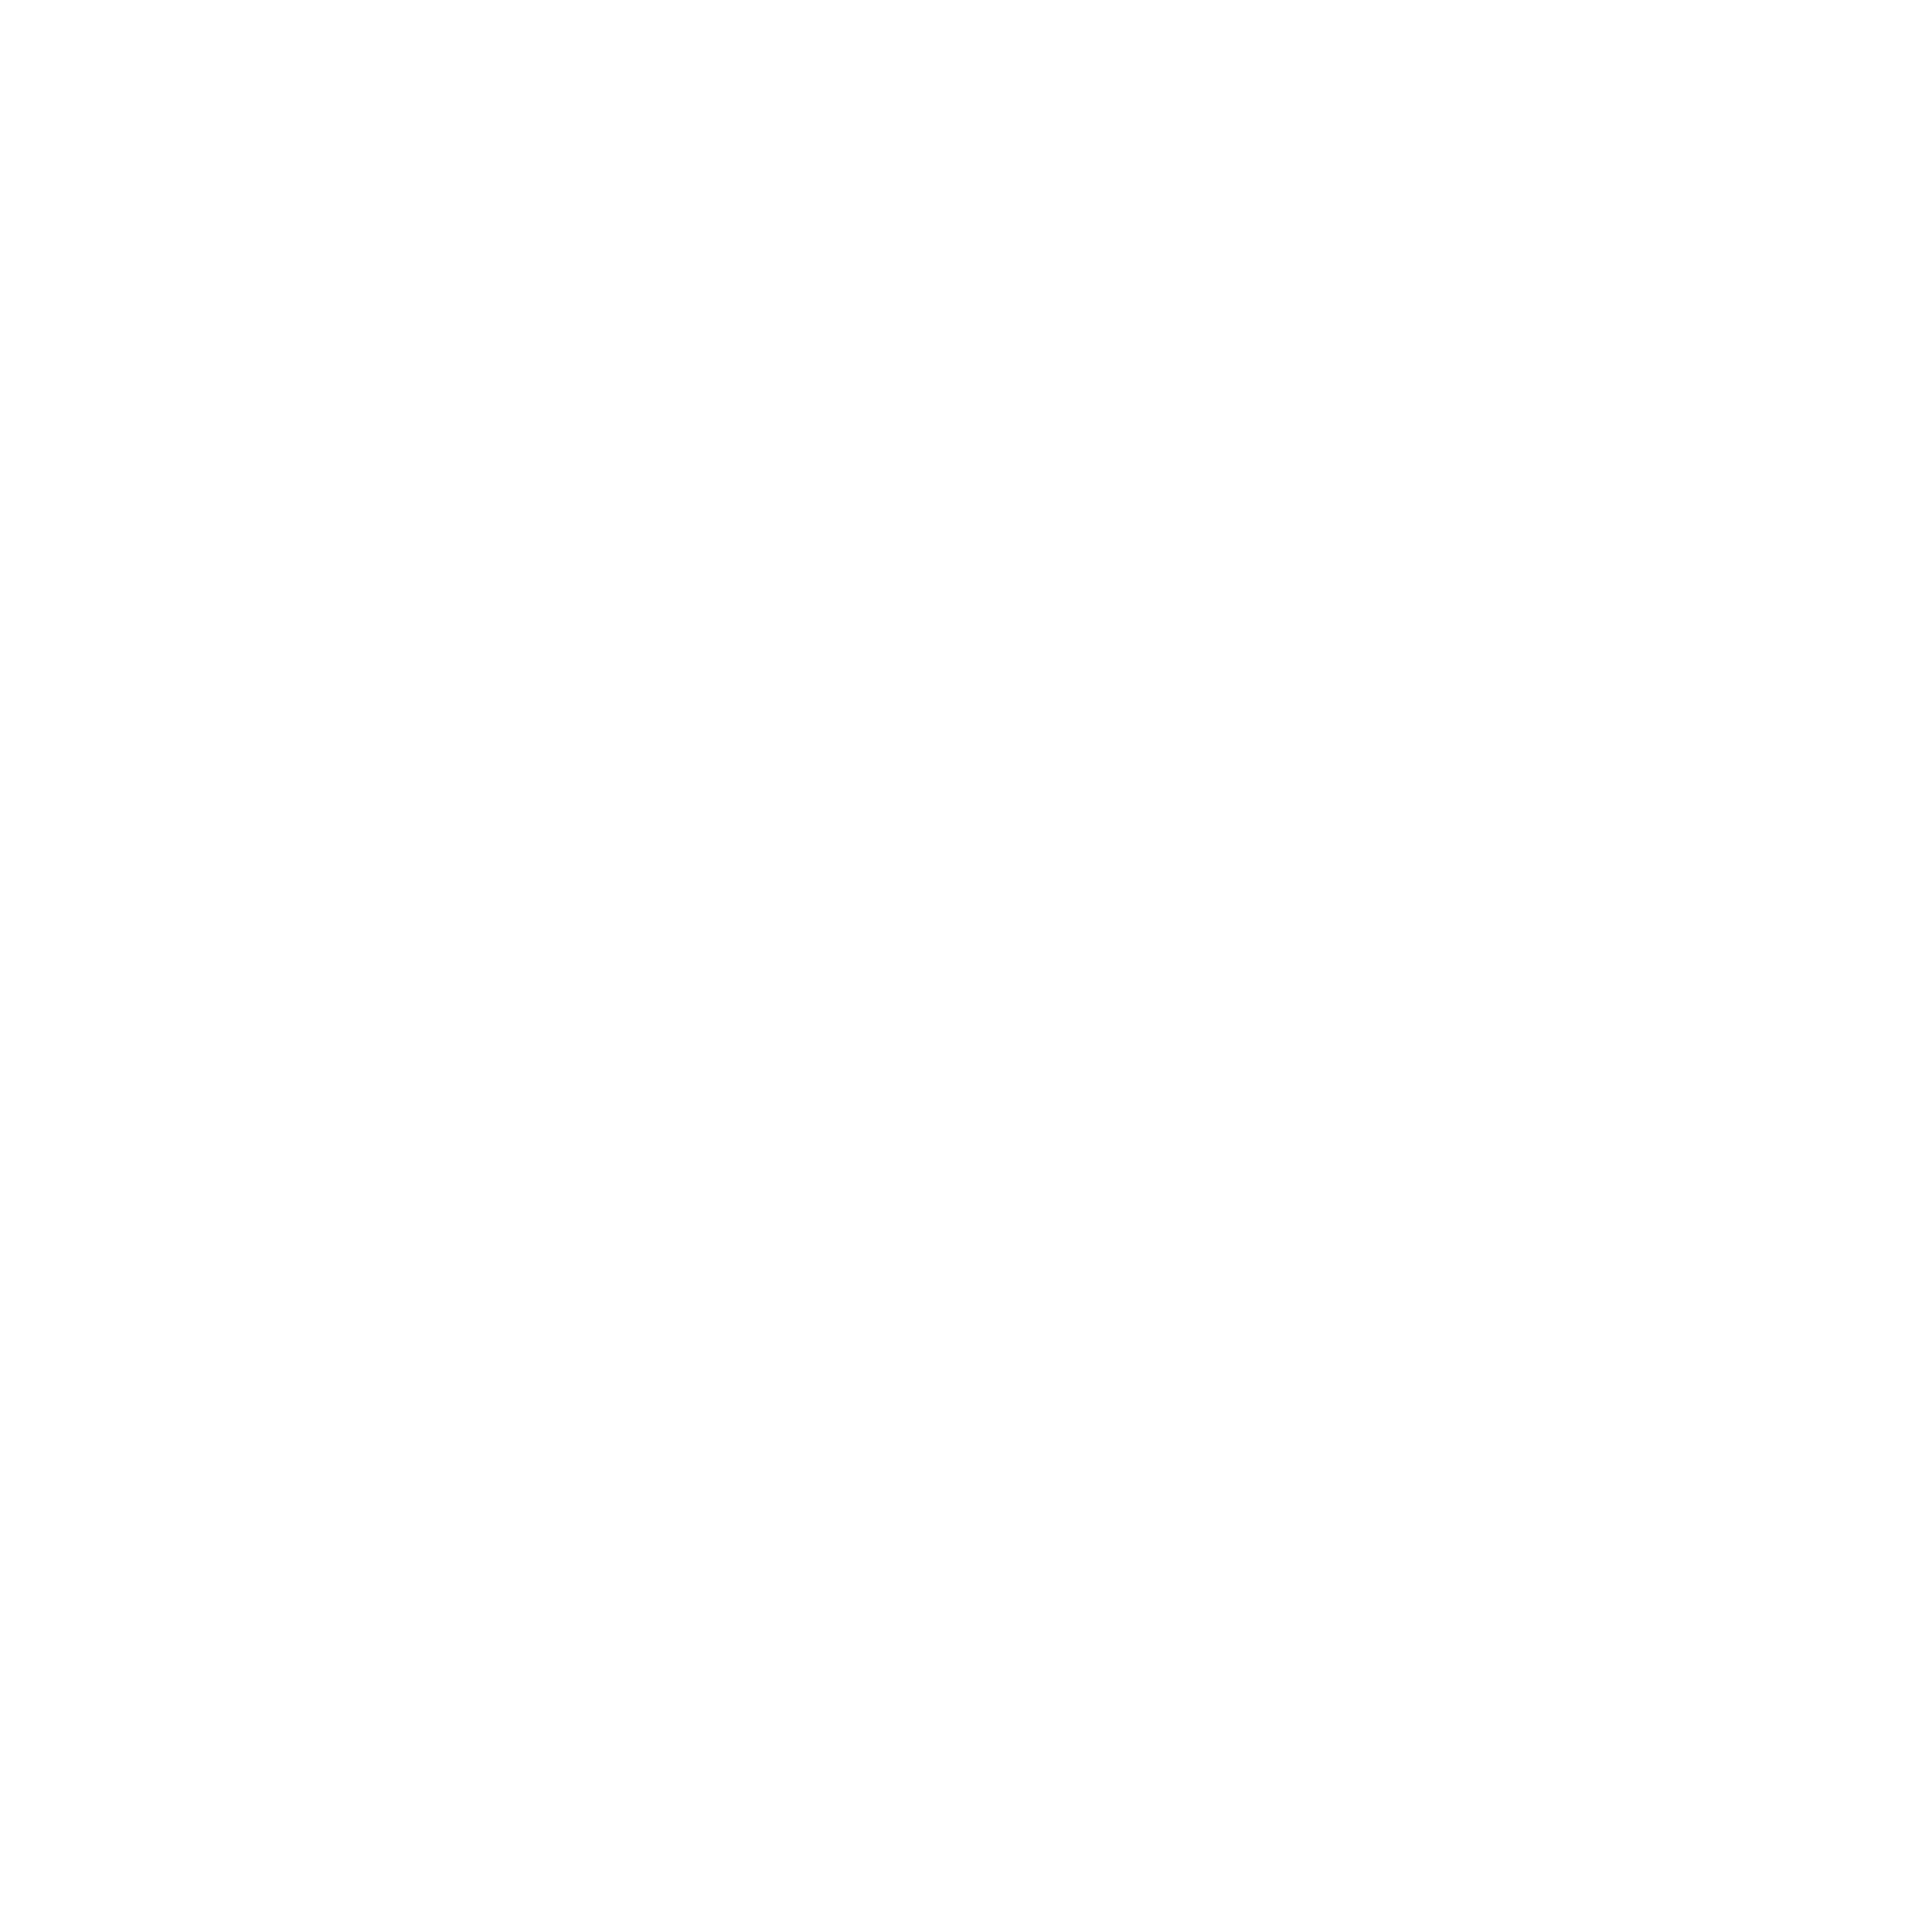 Grout Restore and More Logo